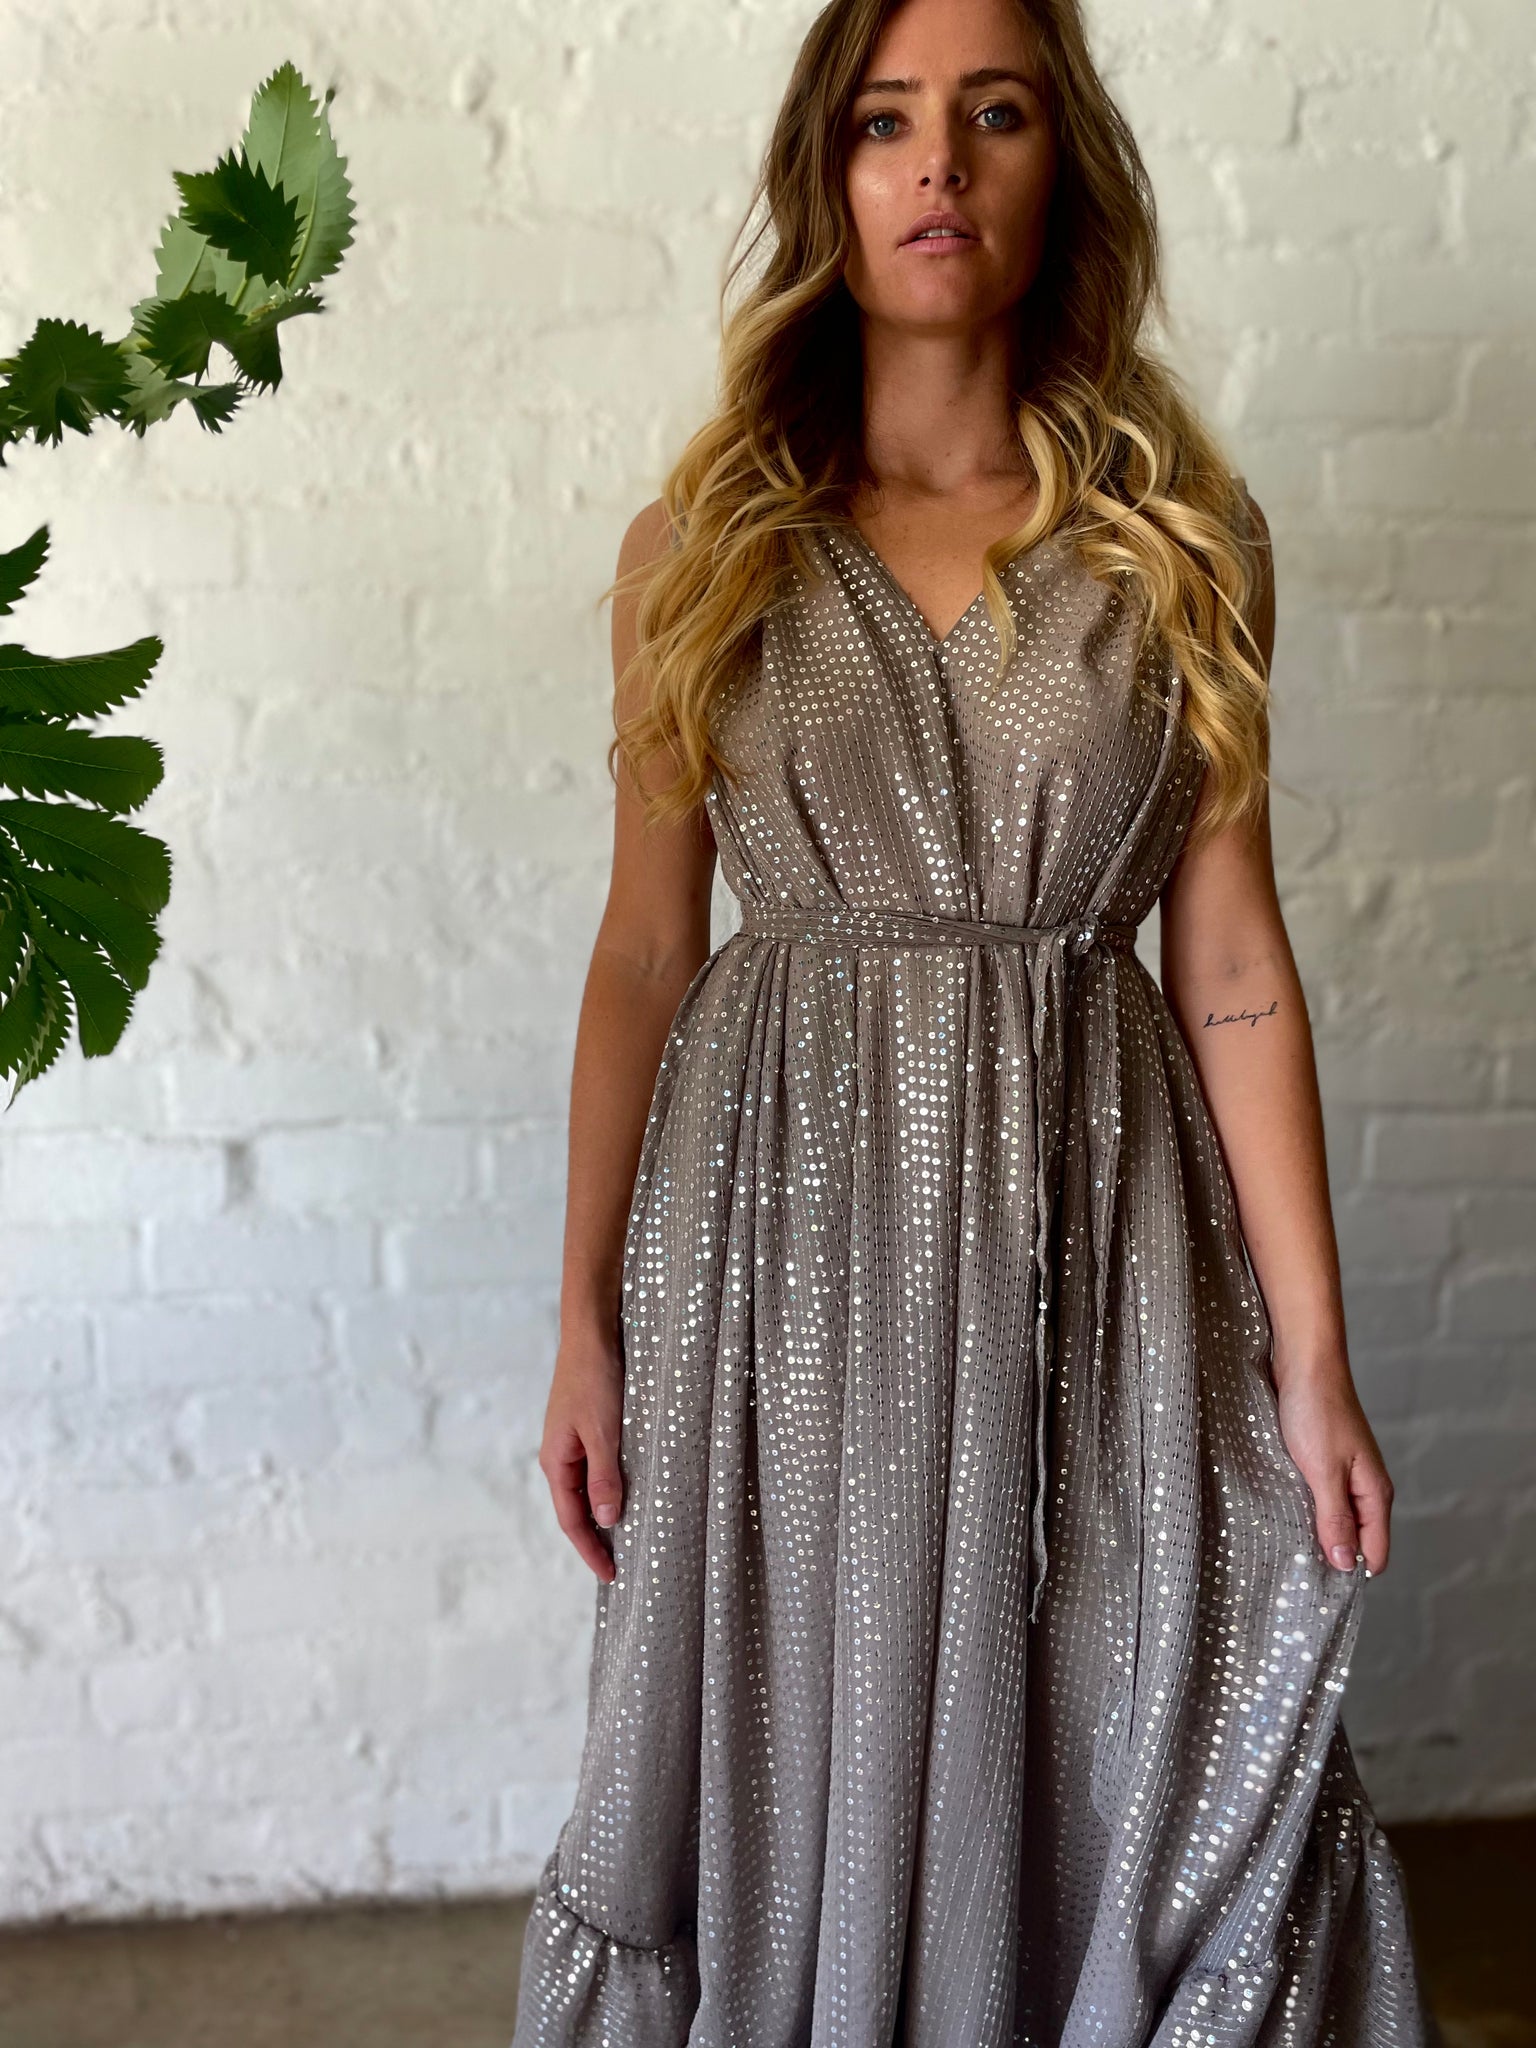 SALE 40% OFF! GREY SILVER  SEQUIN - THE FLOW DRESS